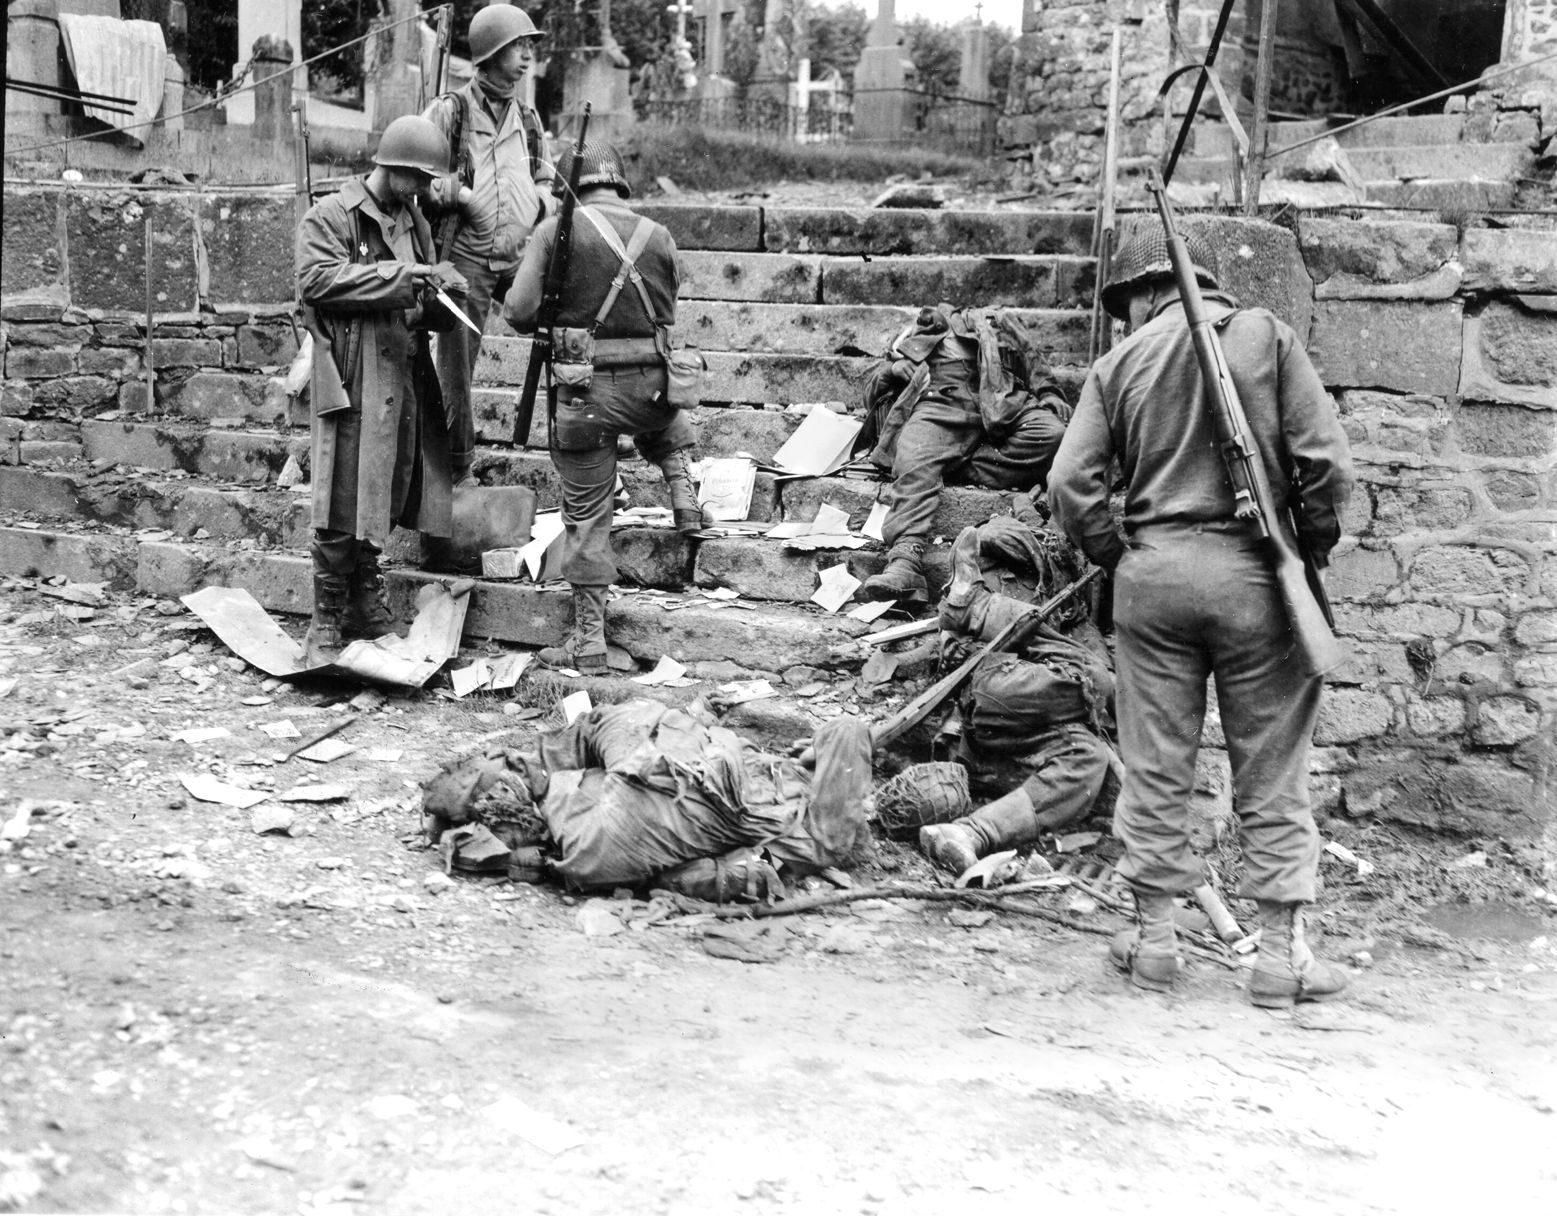 U.S. infantrymen examine the possessions of German casualties in the town of Notre Dame de Cenilly at the beginning of Operation Cobra.